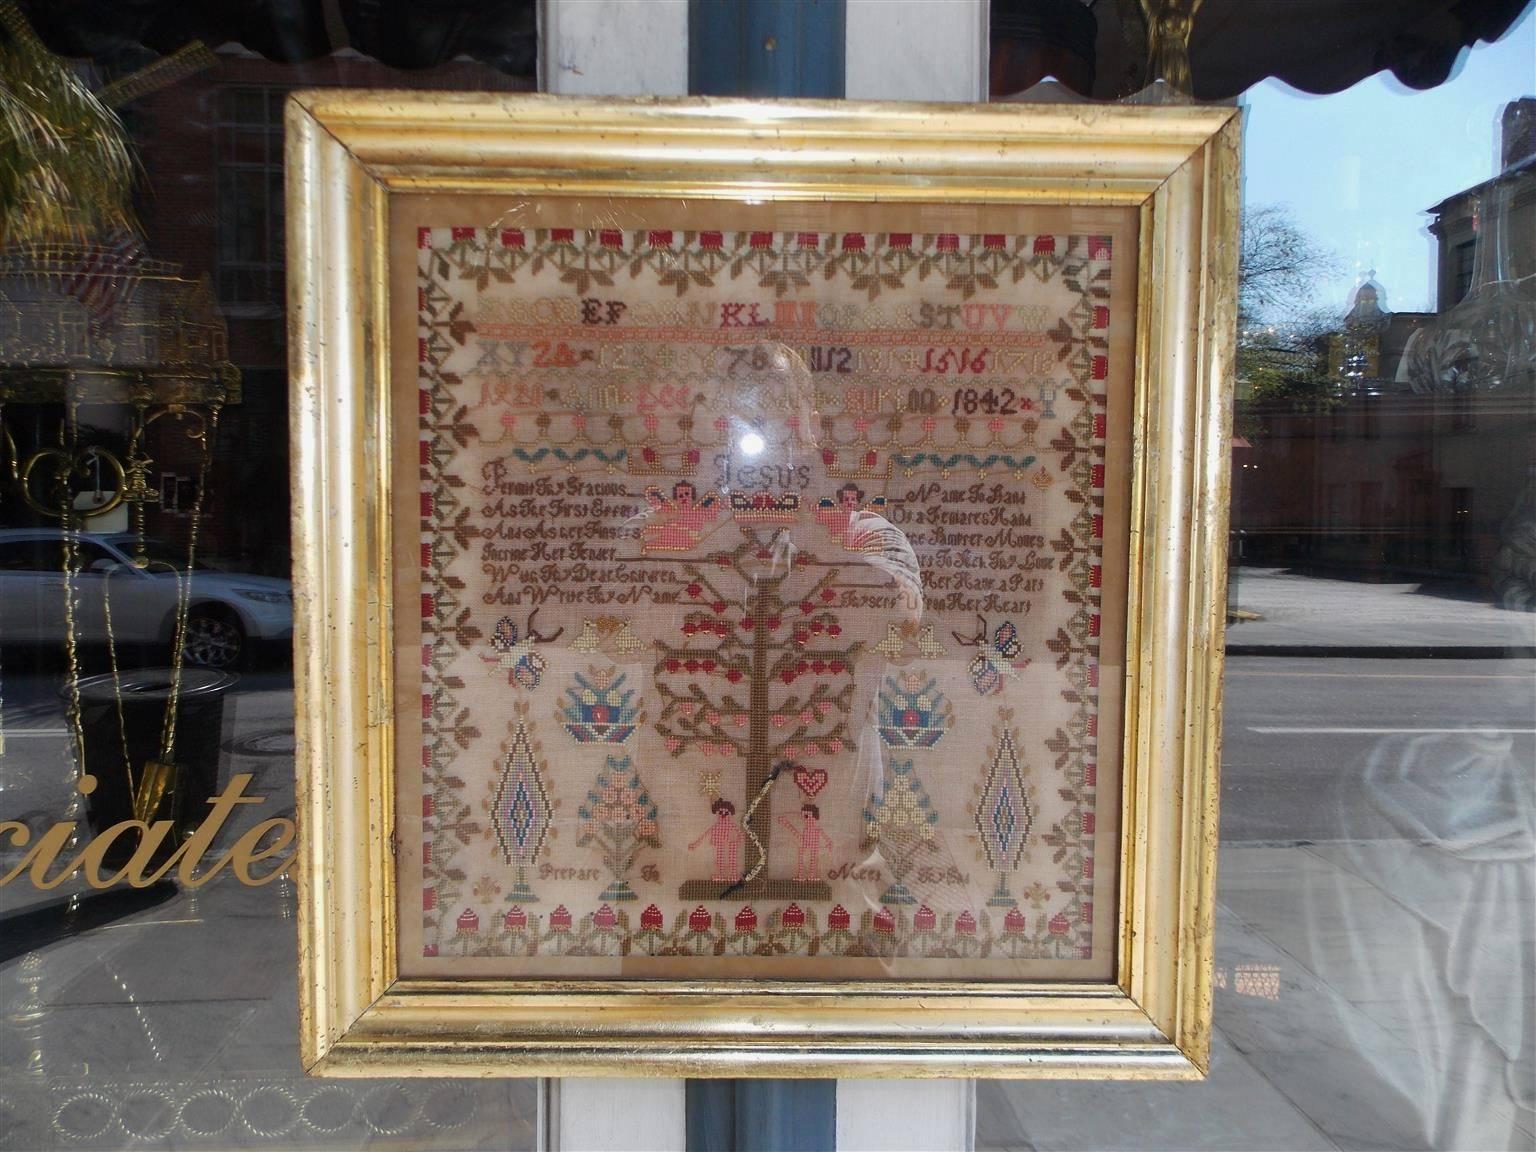 American needlepoint christian themed sampler in the original gold gilt frame under glass. Tree of knowledge good and evil. Adam and Eve with the serpent. Worked by Ann Lee Burtin, age 14, dated 1842.